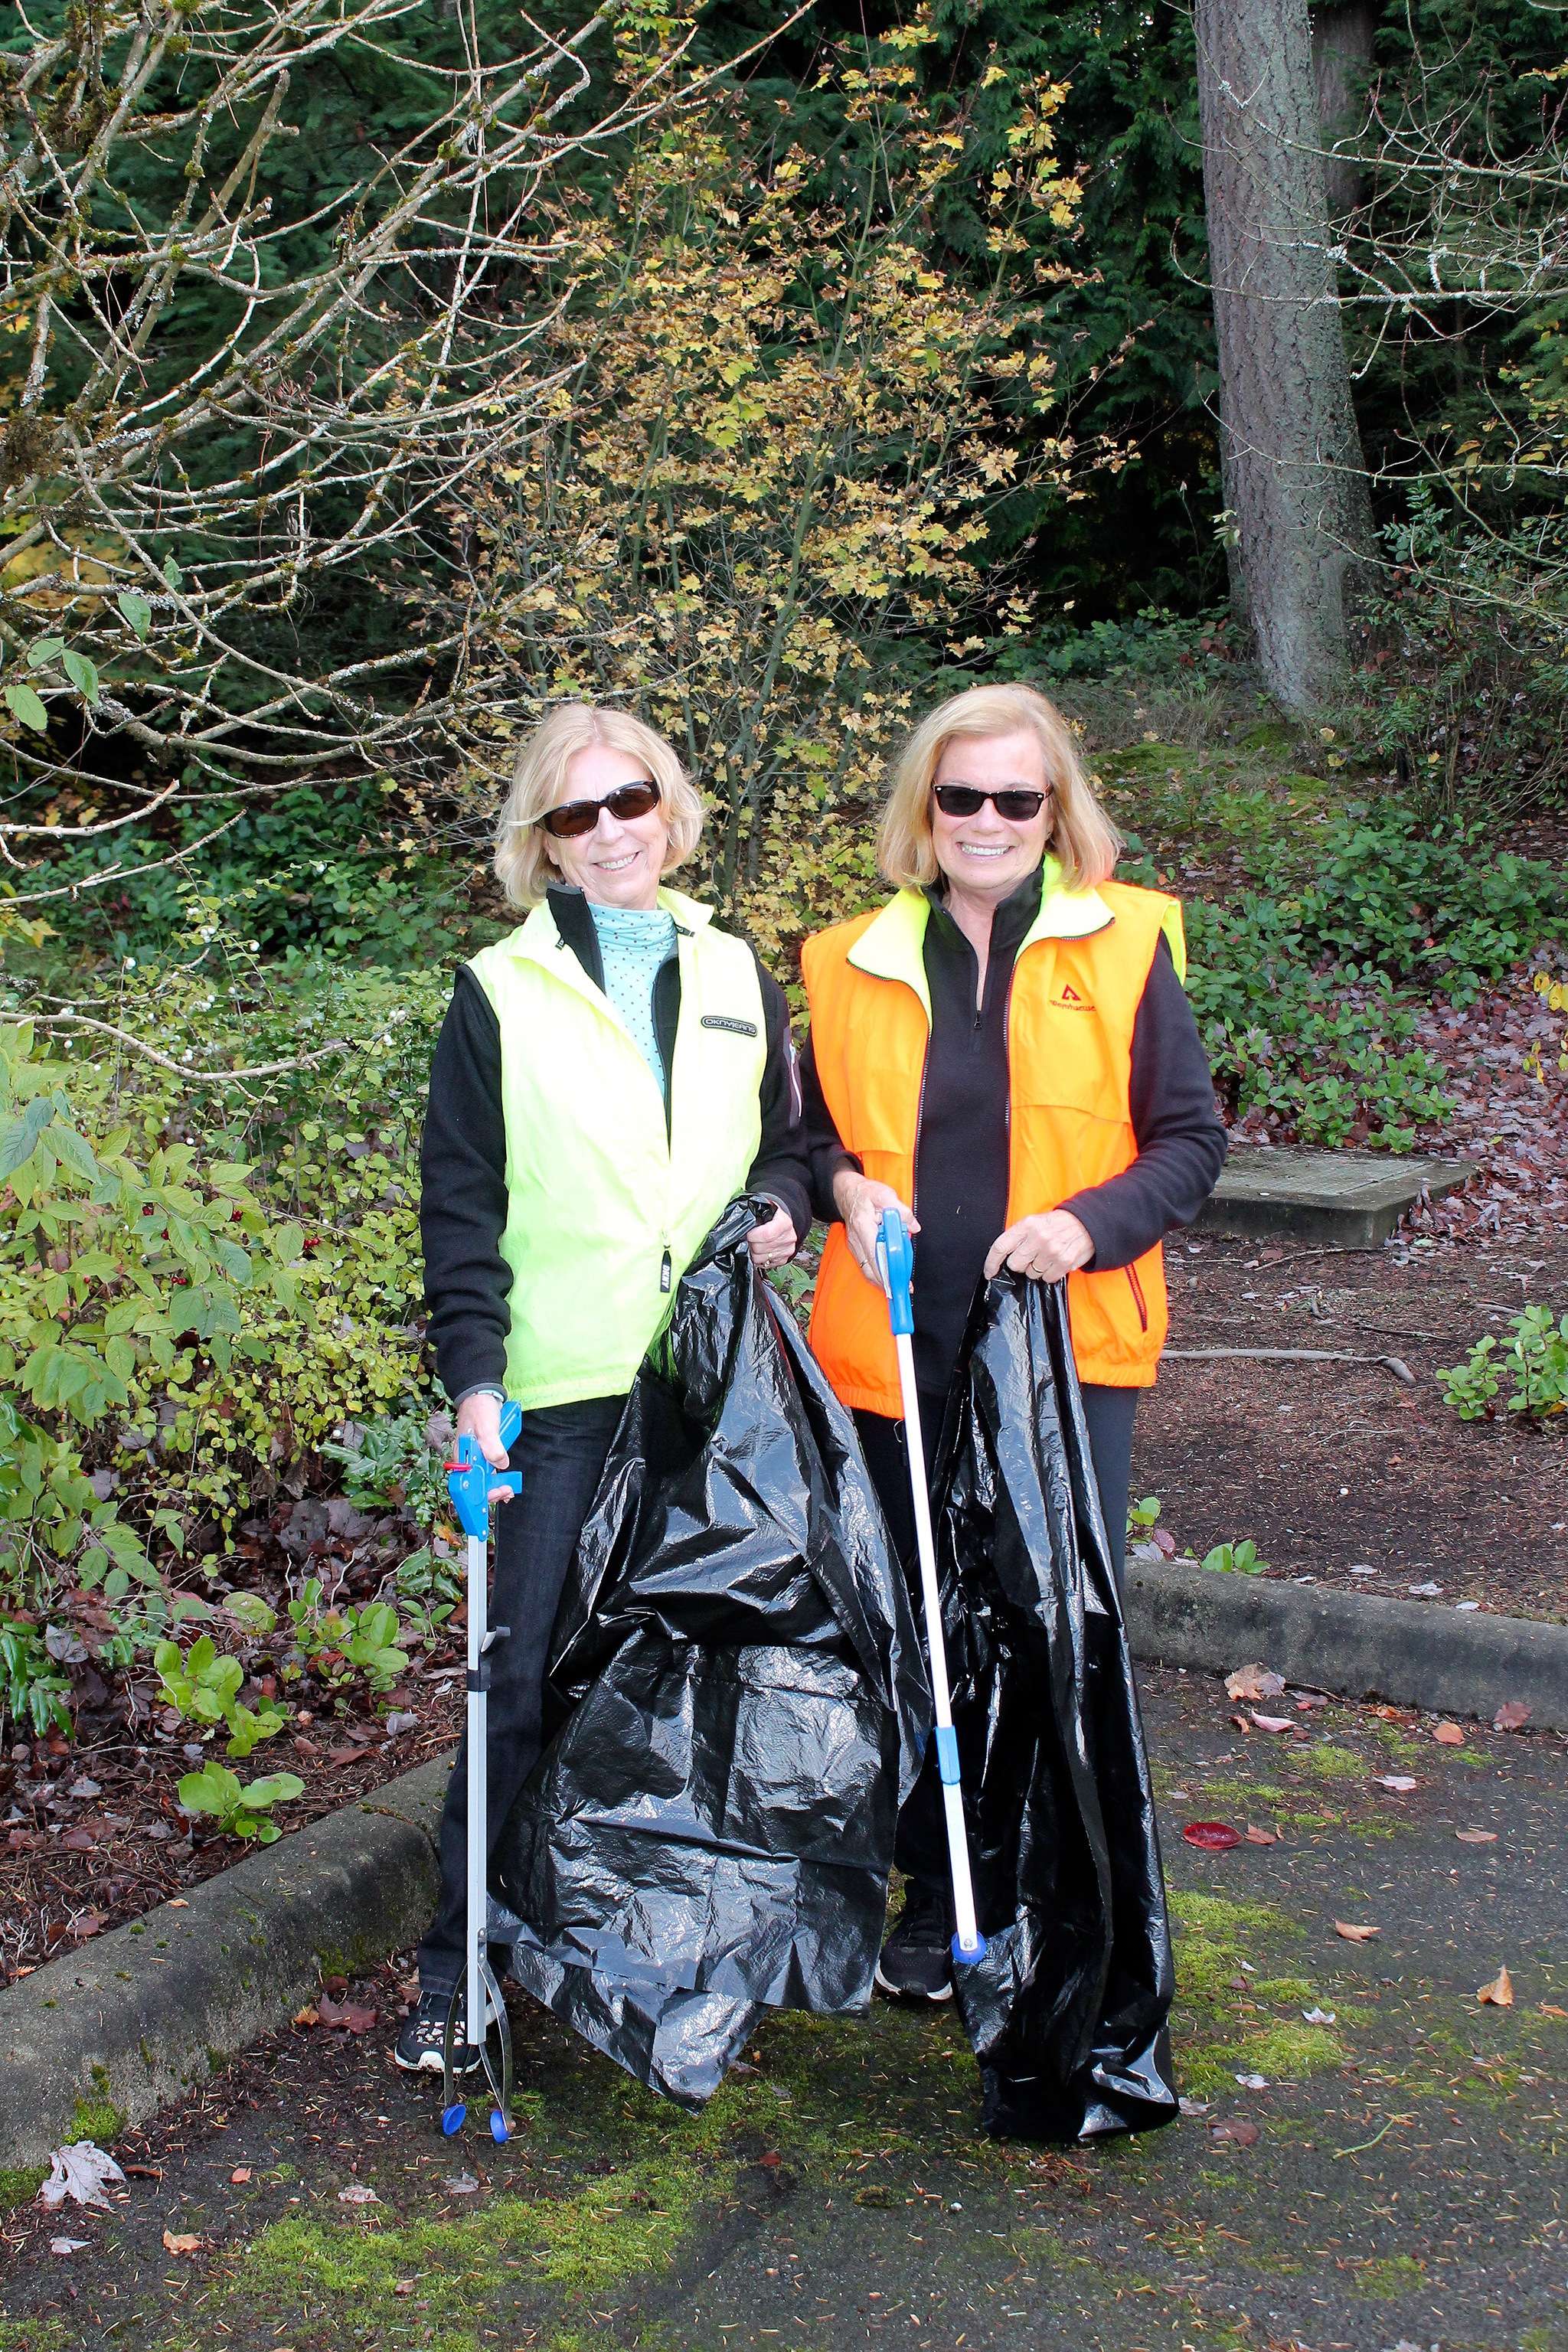 Citizen of the Month: ‘Trashy ladies’ clean up Federal Way neighborhood one bag at a time